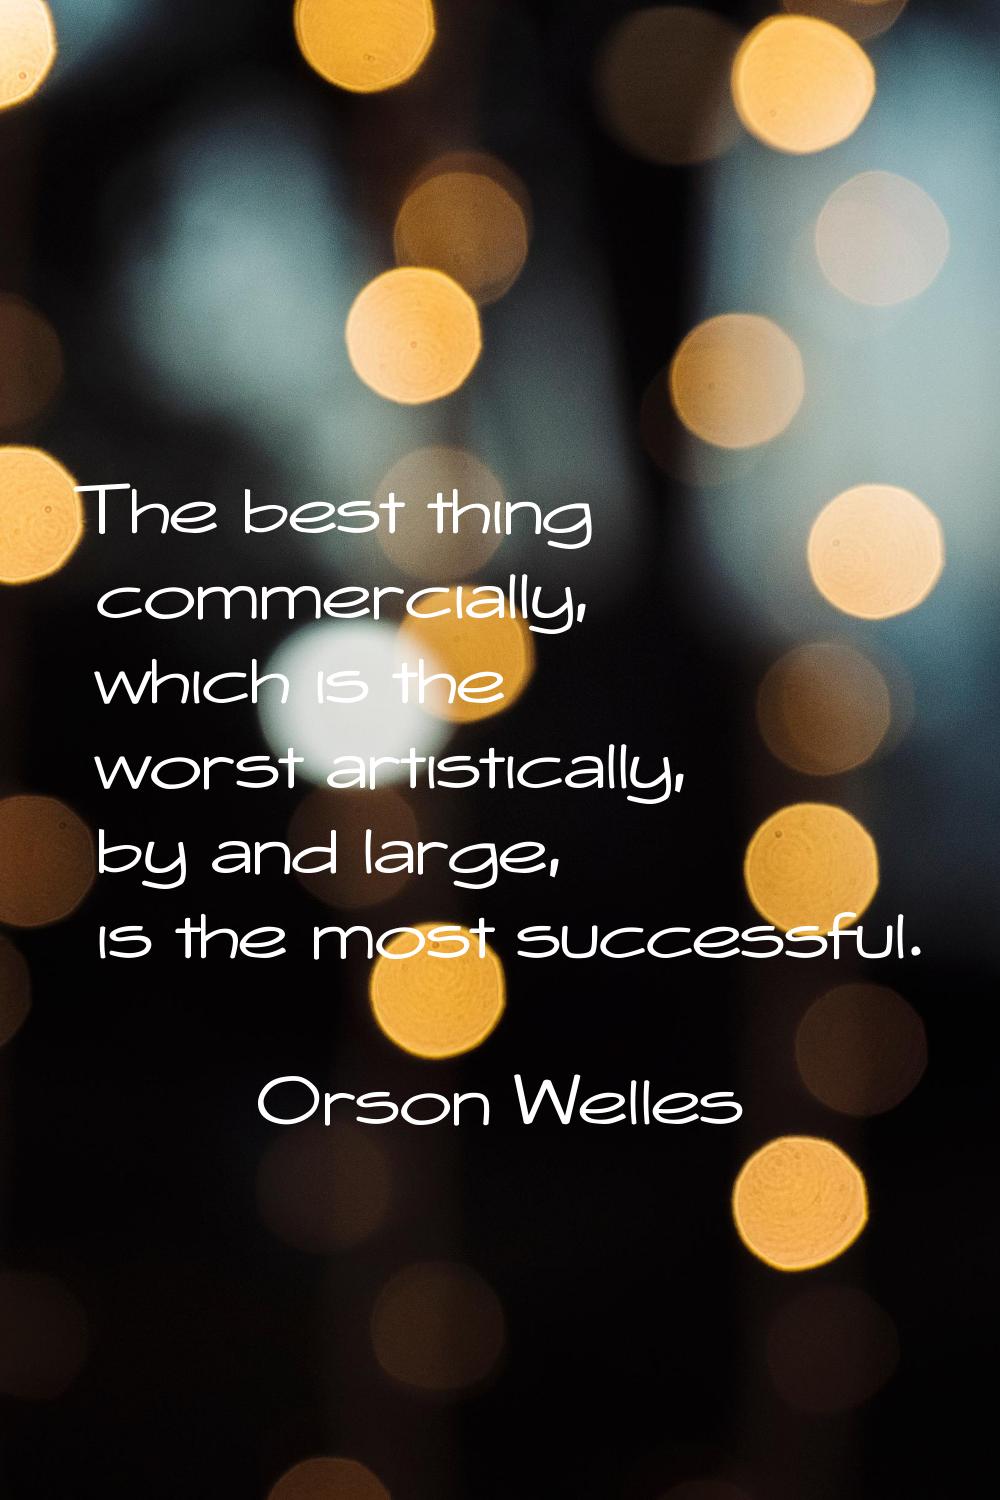 The best thing commercially, which is the worst artistically, by and large, is the most successful.